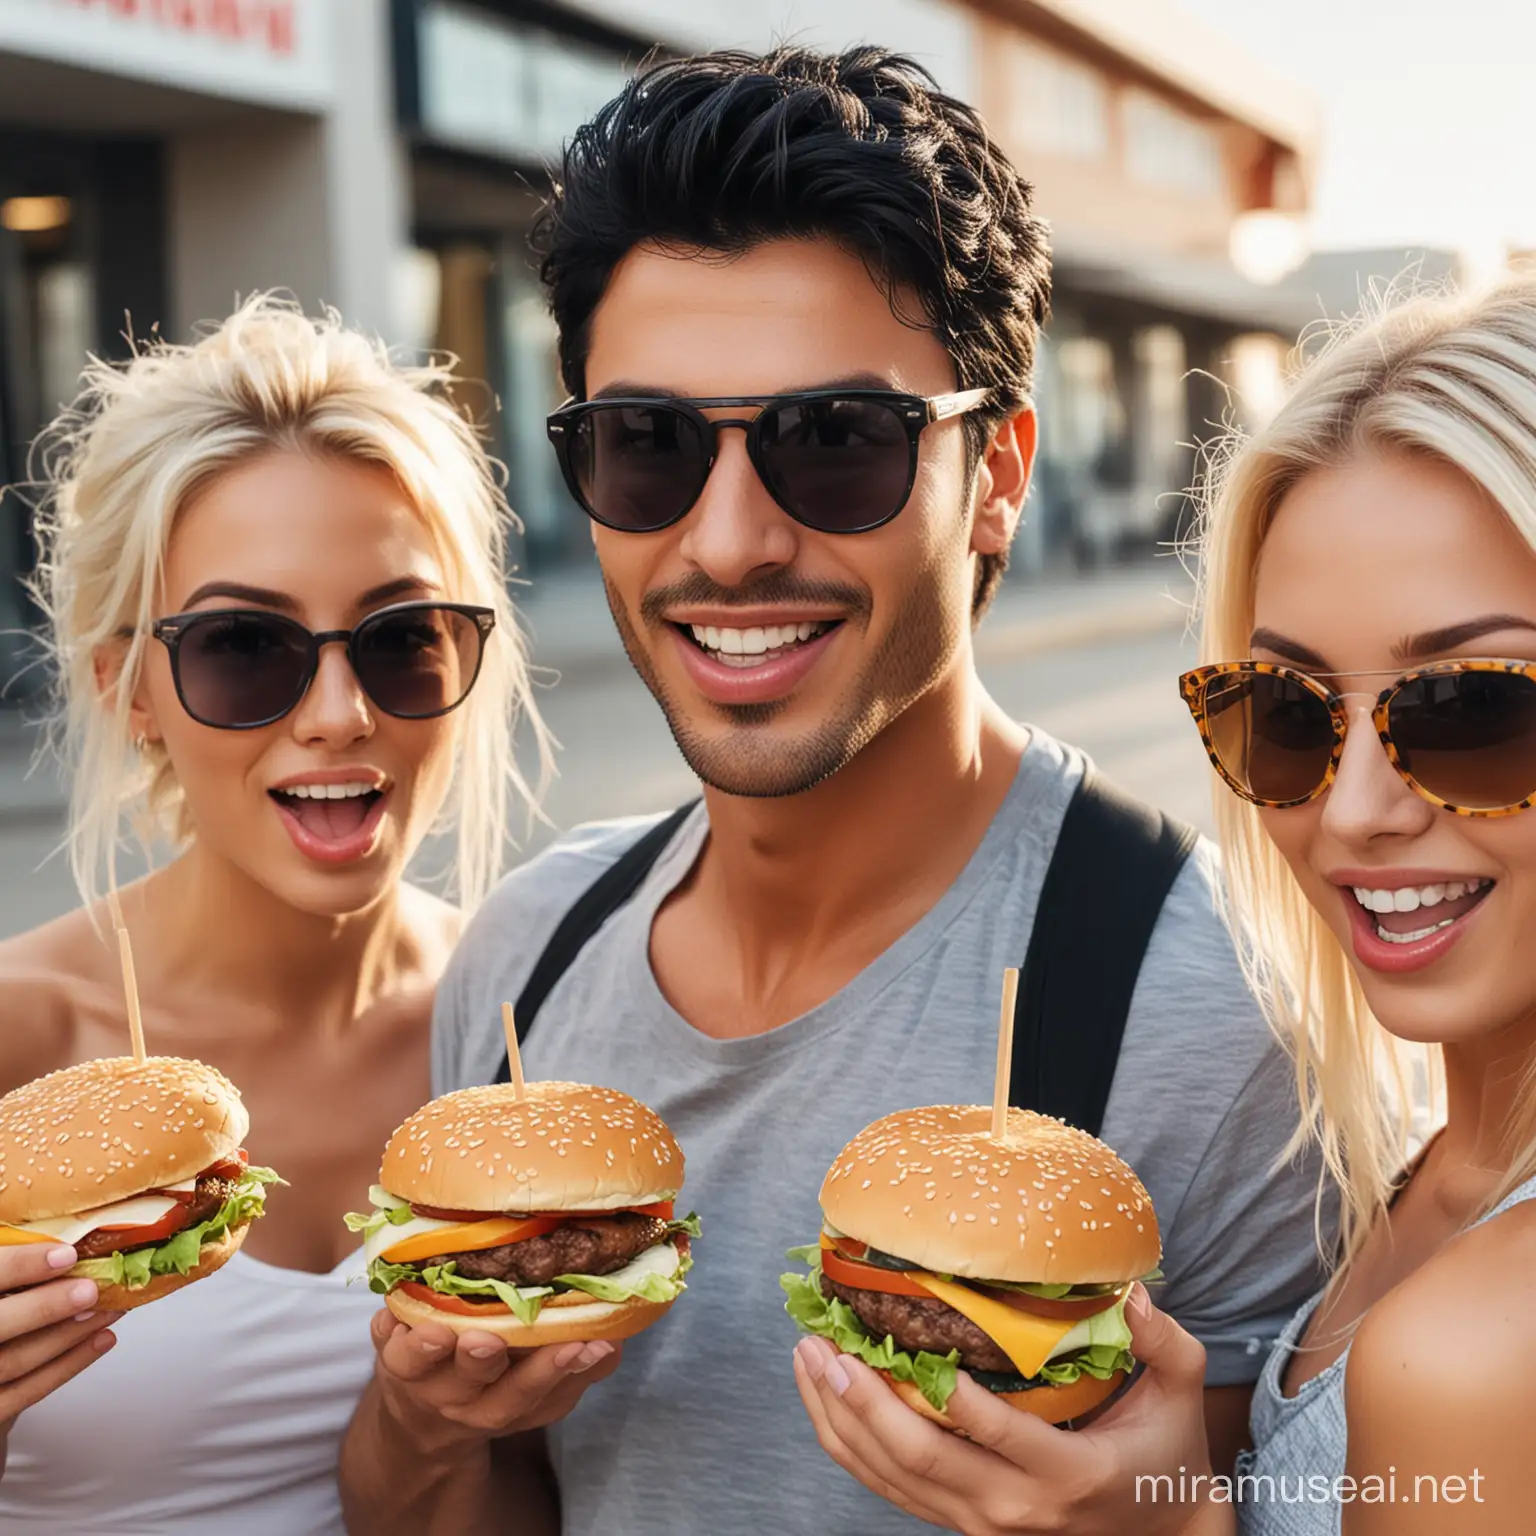 Handsome man with black hair, stubble and sunglasses with two blonde girls eating hamburgers